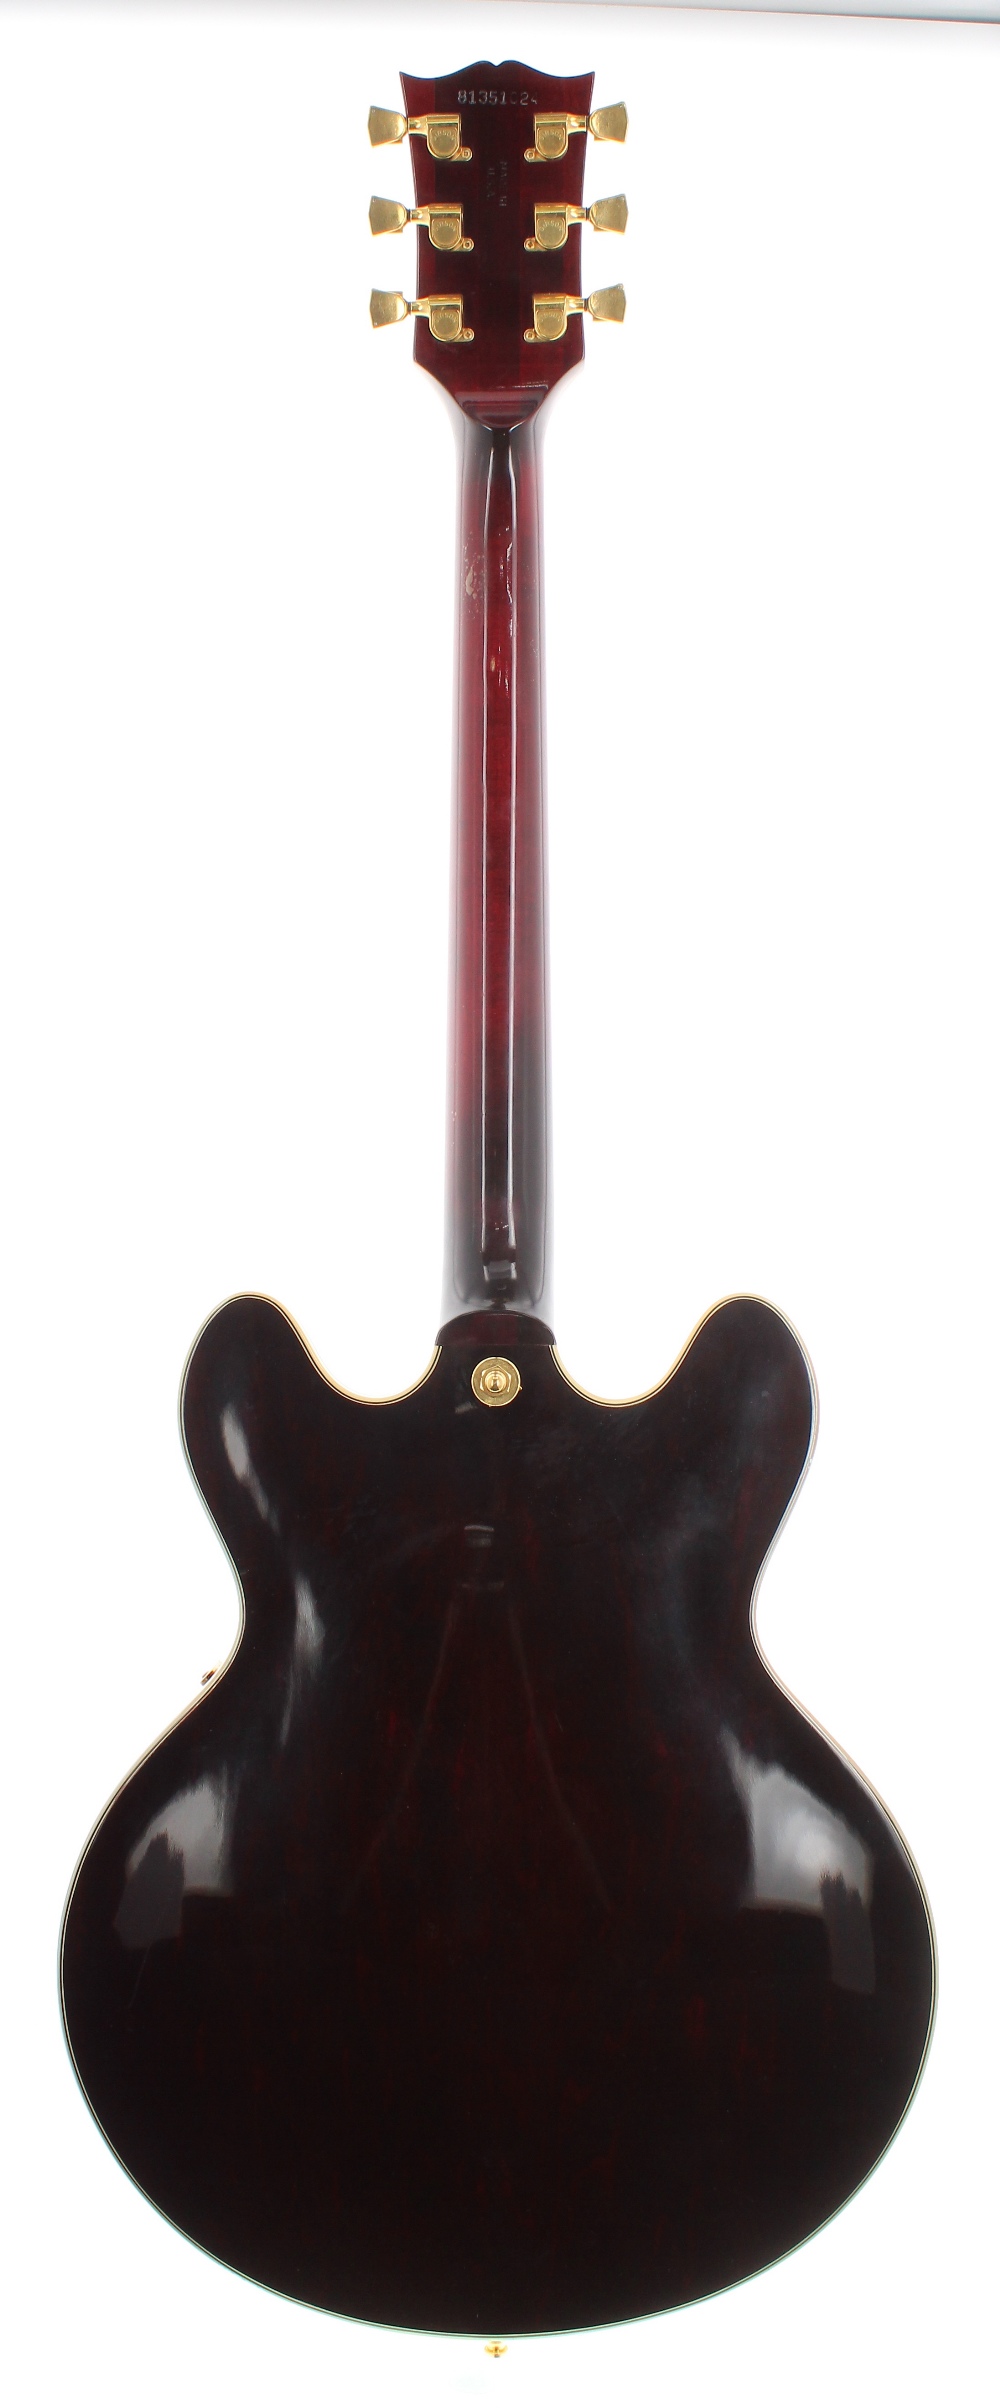 1981 Gibson ES-345 TD semi-hollow body electric guitar, made in USA, ser. no. 8xxx1xx4; Finish: wine - Image 2 of 19